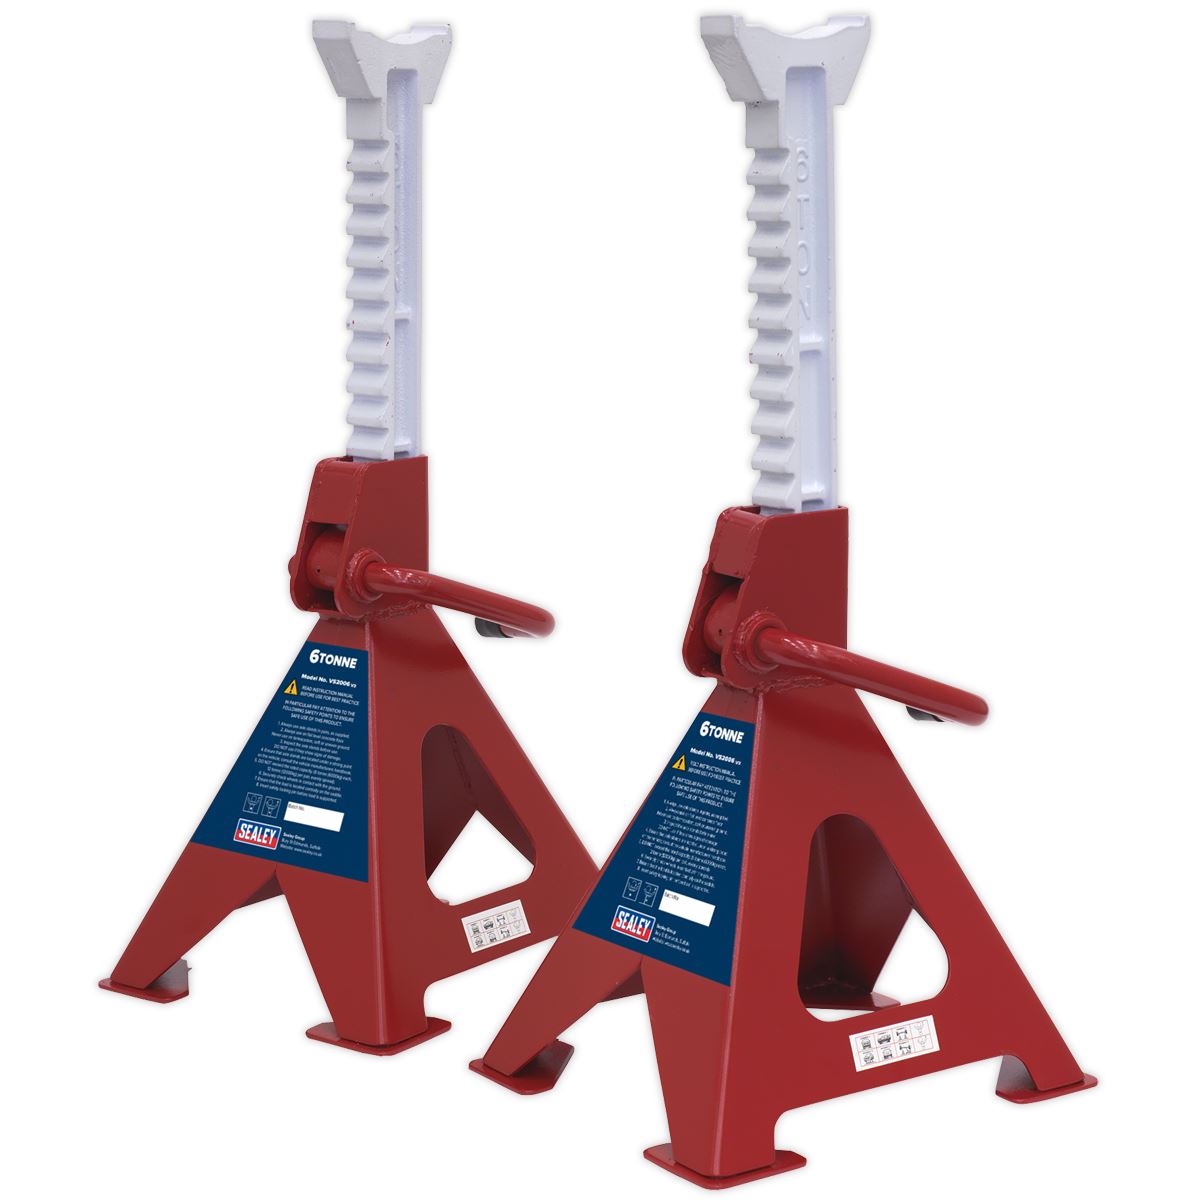 Sealey Ratchet Type Axle Stands (Pair) 6 Tonne Capacity per Stand